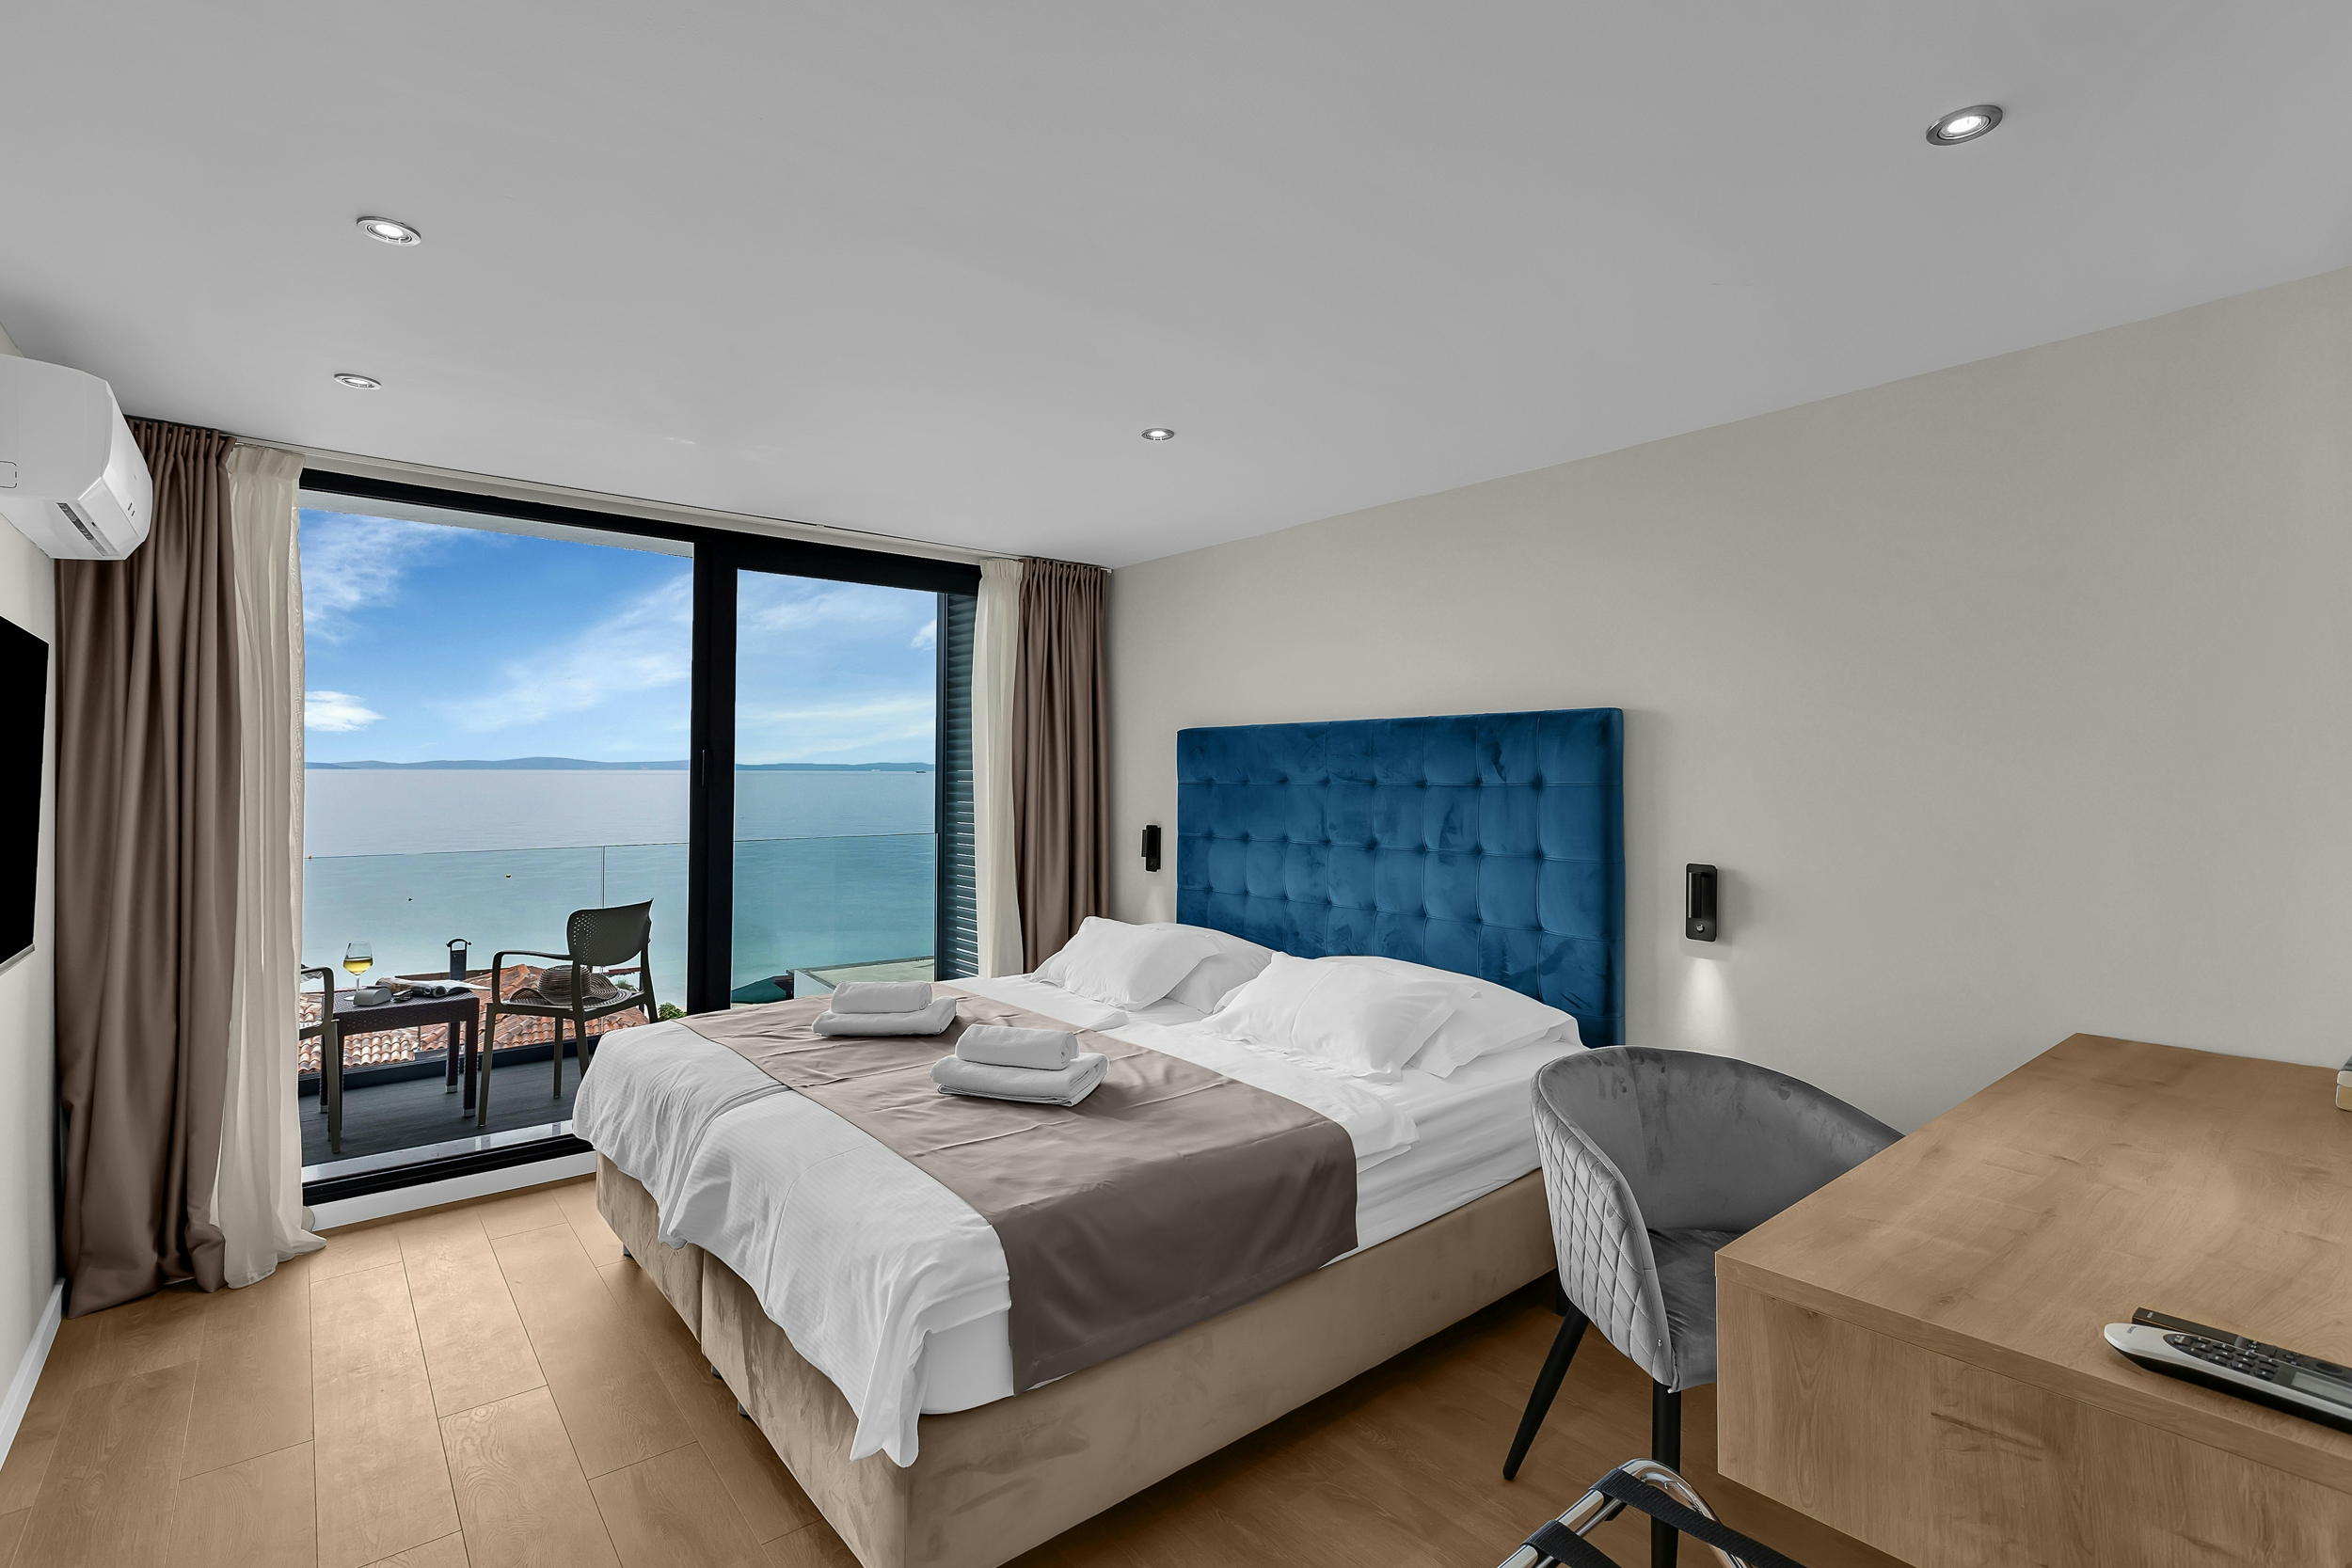 Carousel image 1 of Double Room with seaview